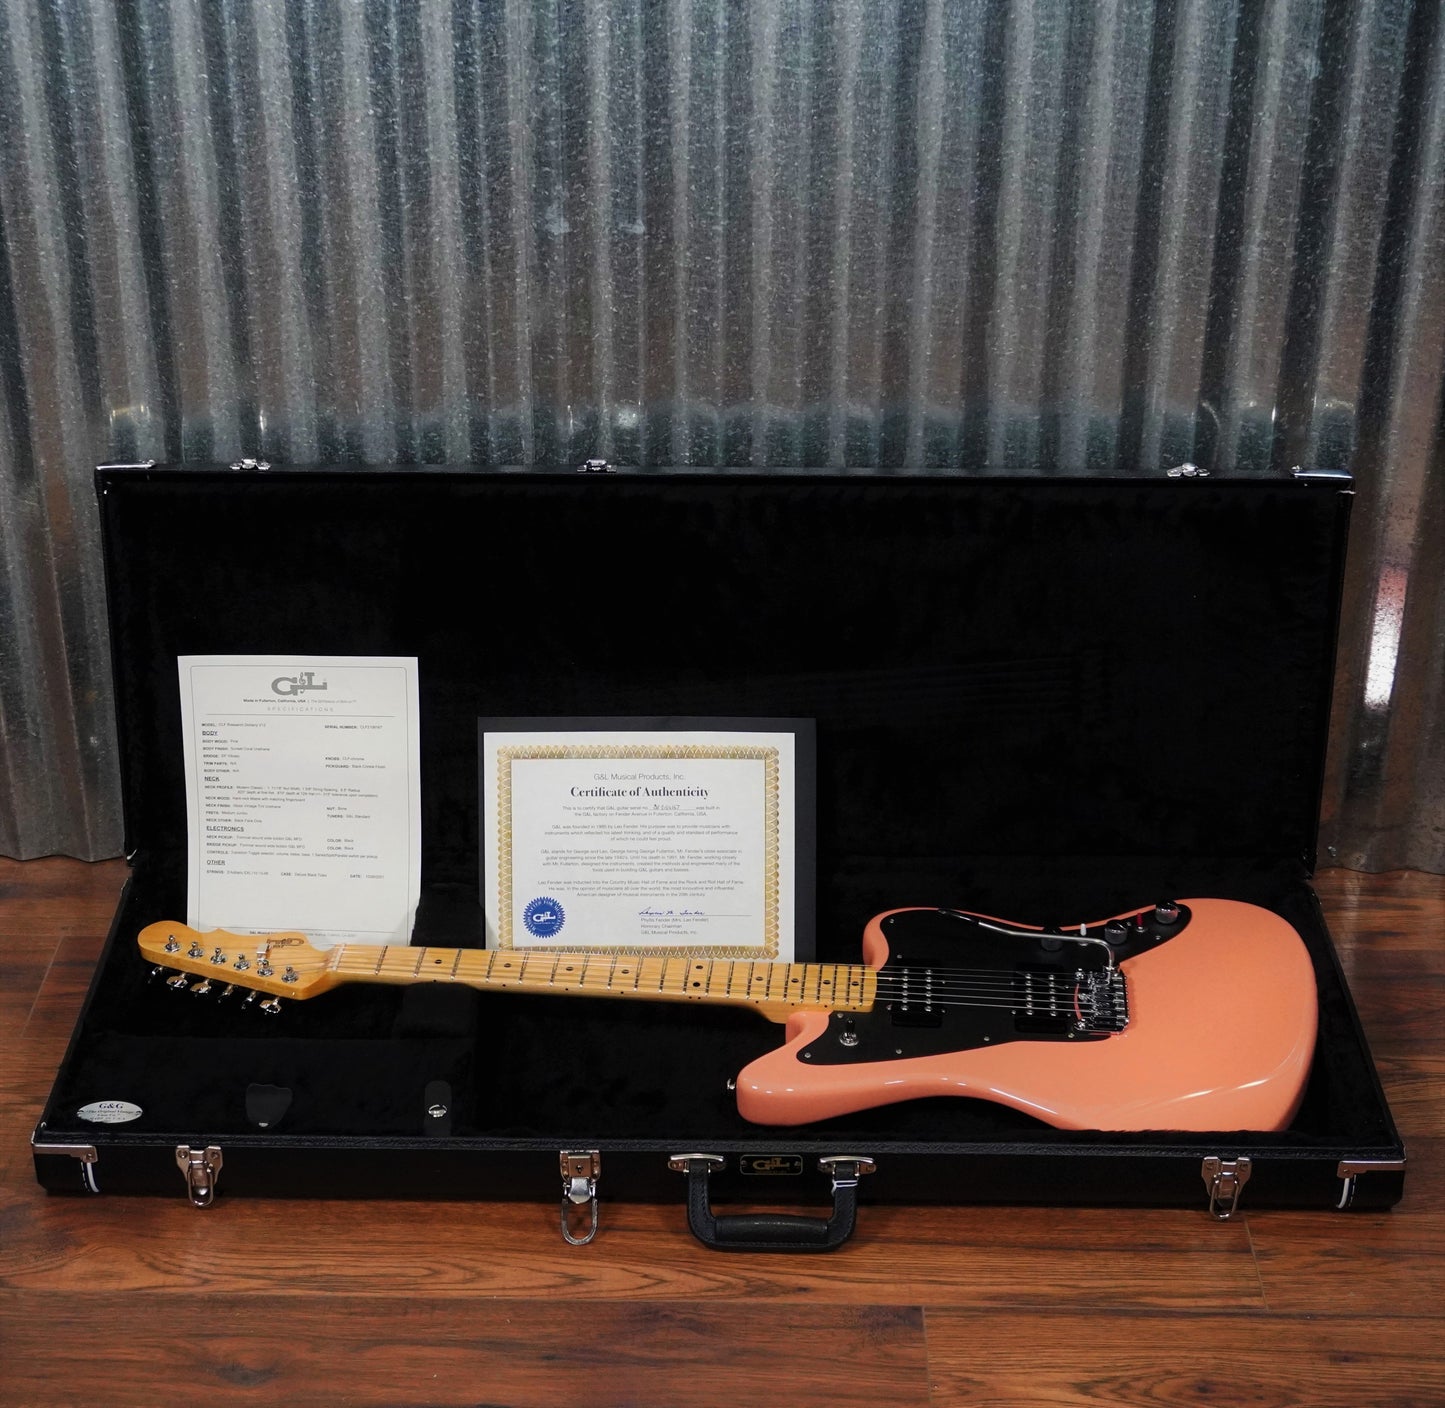 G&L USA CLF Doheny V12 Sunset Coral Rosewood Satin Neck Guitar & Case #6167